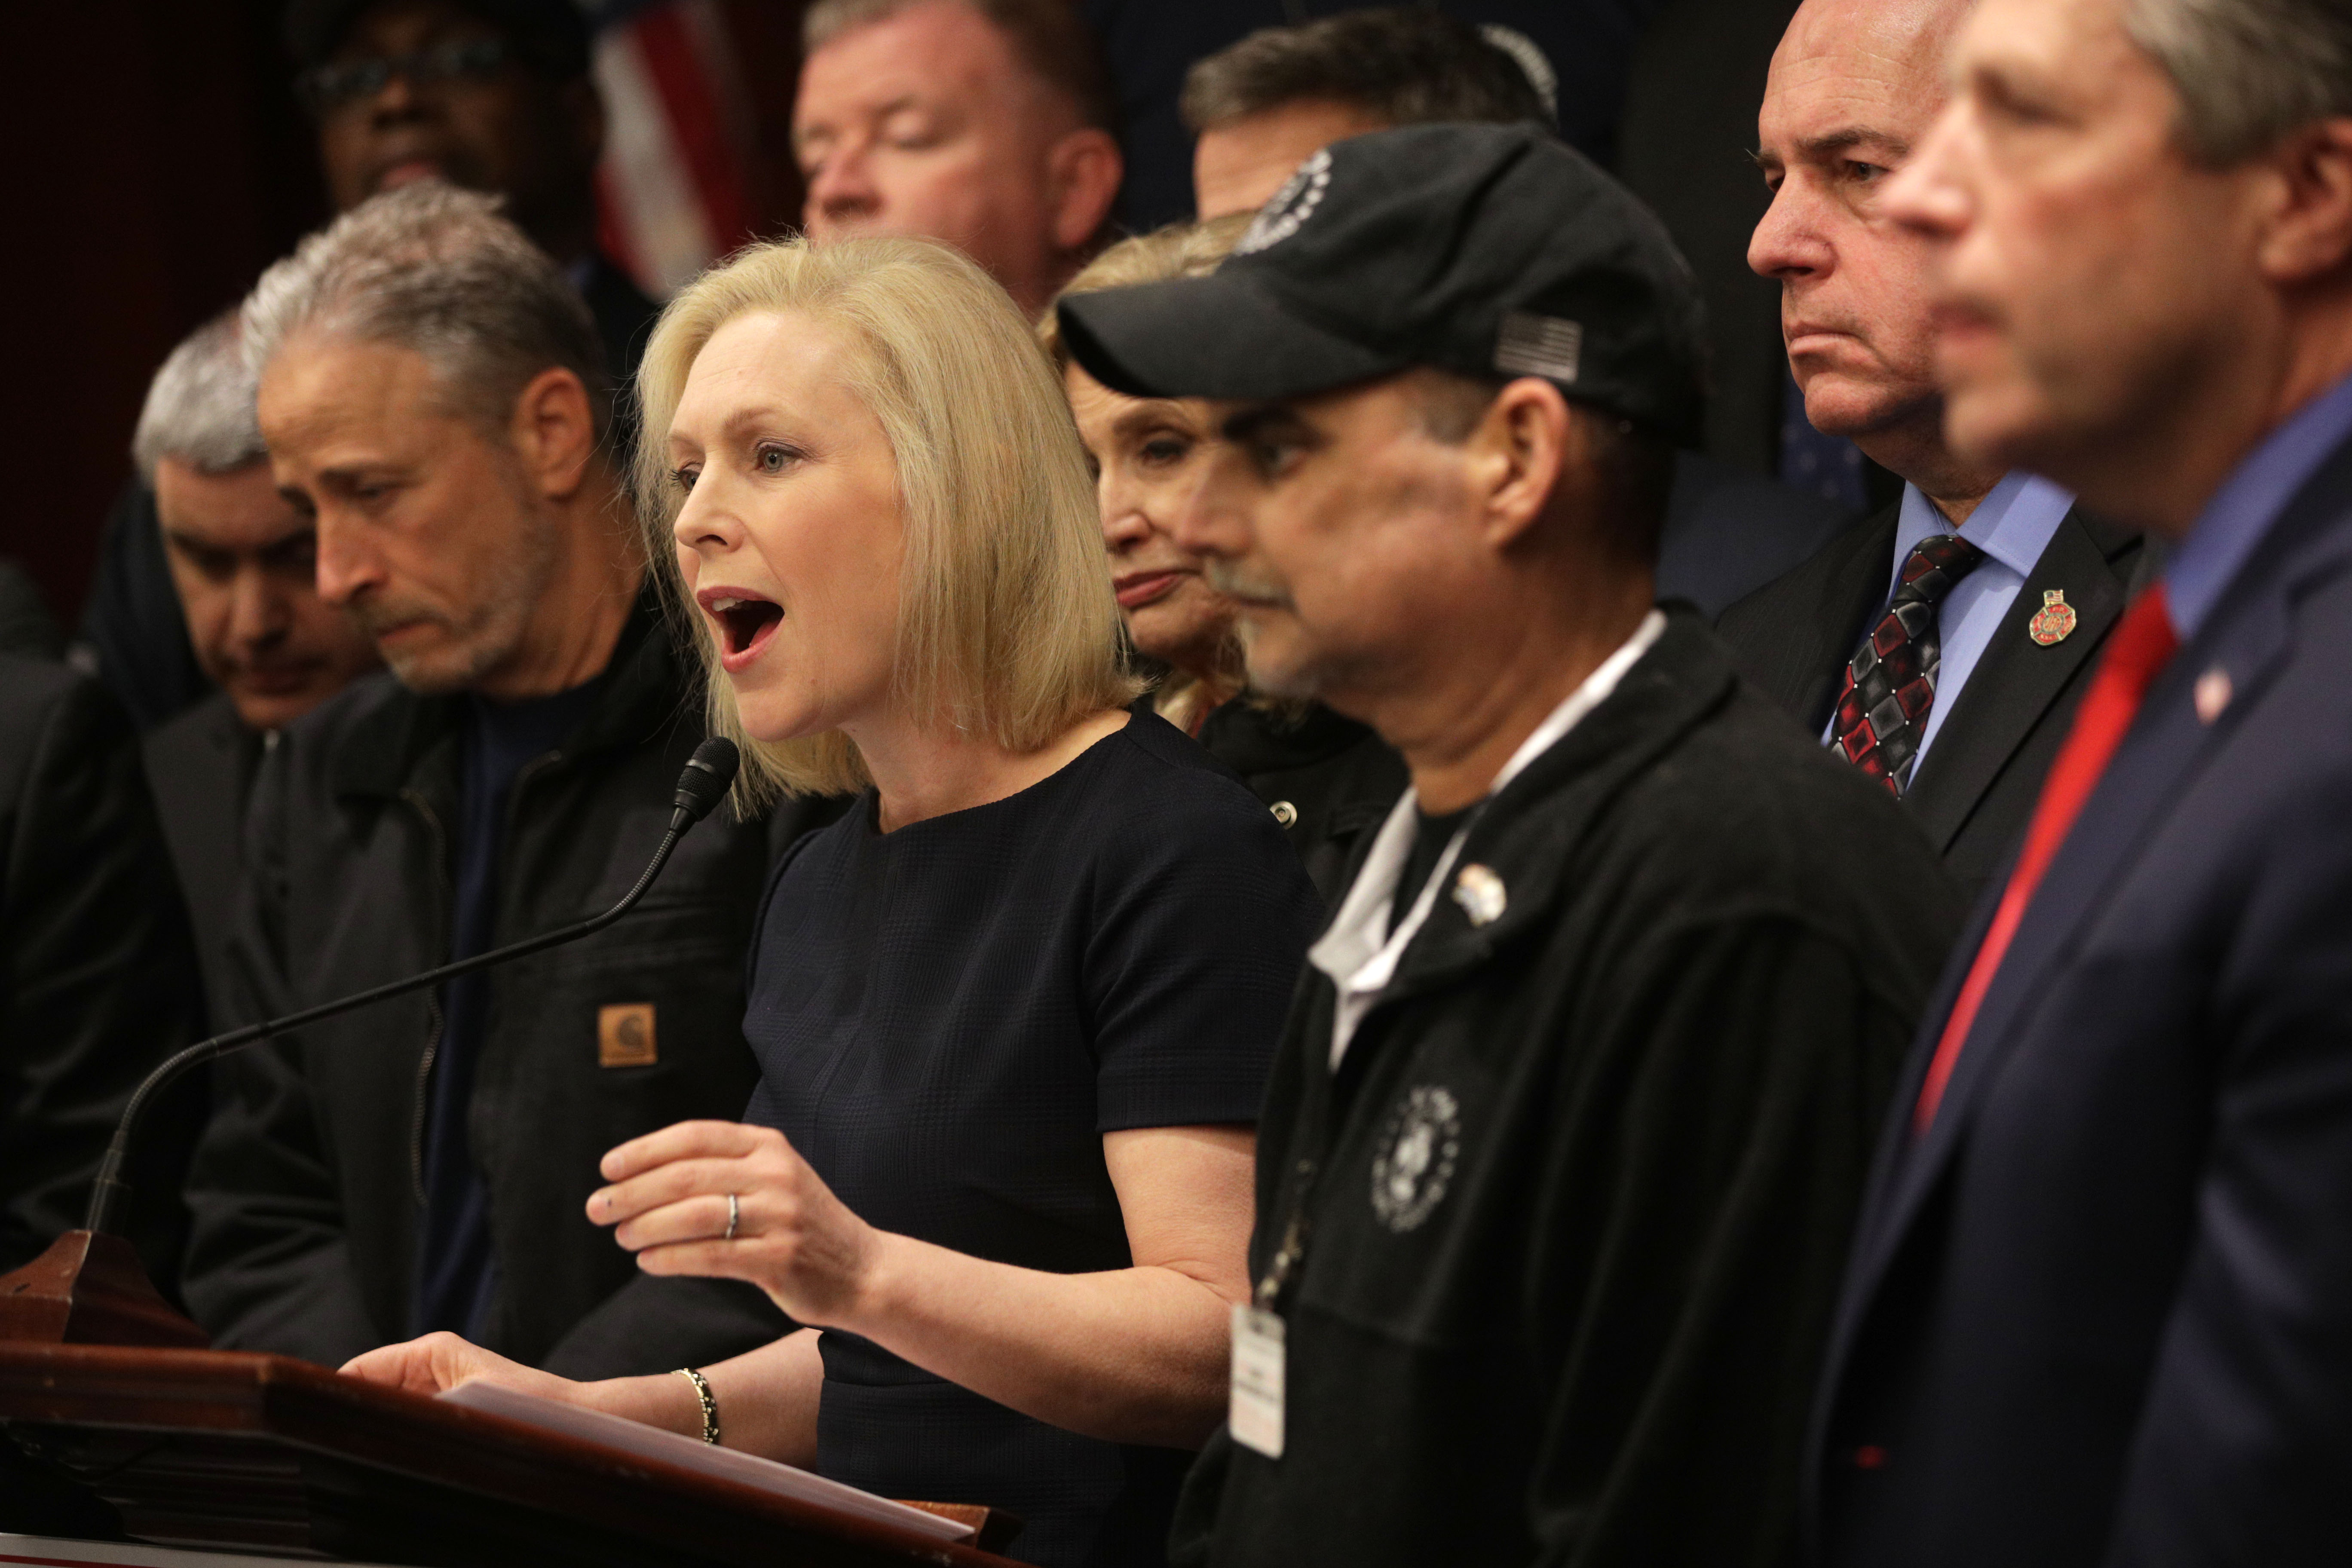 U.S. Sen. Kirsten Gillibrand speaks during a news conference February 25, 2019 on Capitol Hill in Washington, DC. (Photo by Alex Wong/Getty Images)